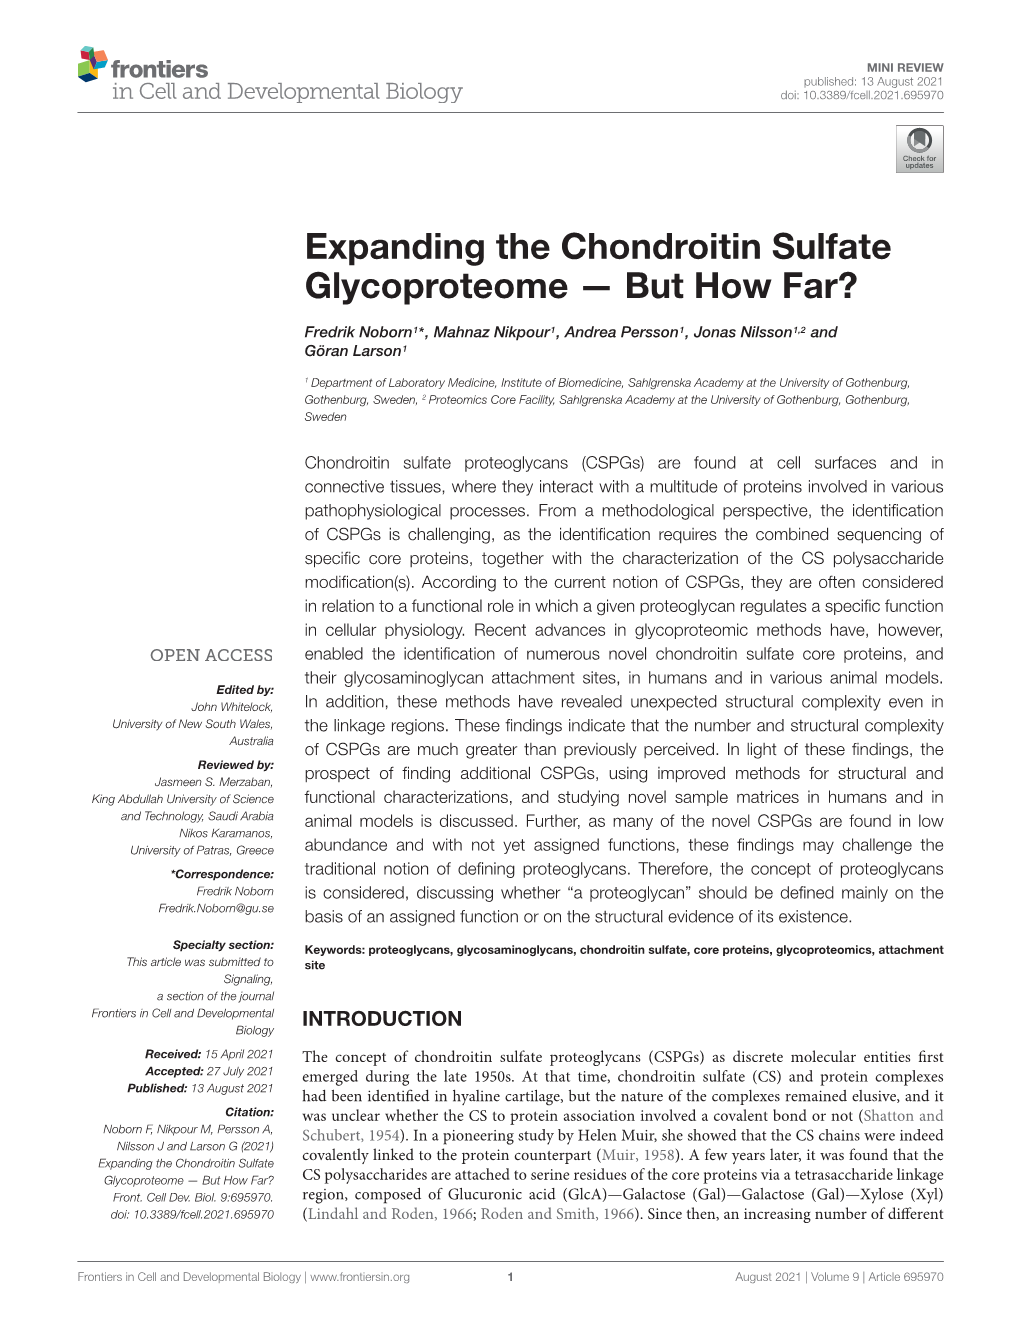 Expanding the Chondroitin Sulfate Glycoproteome — but How Far?